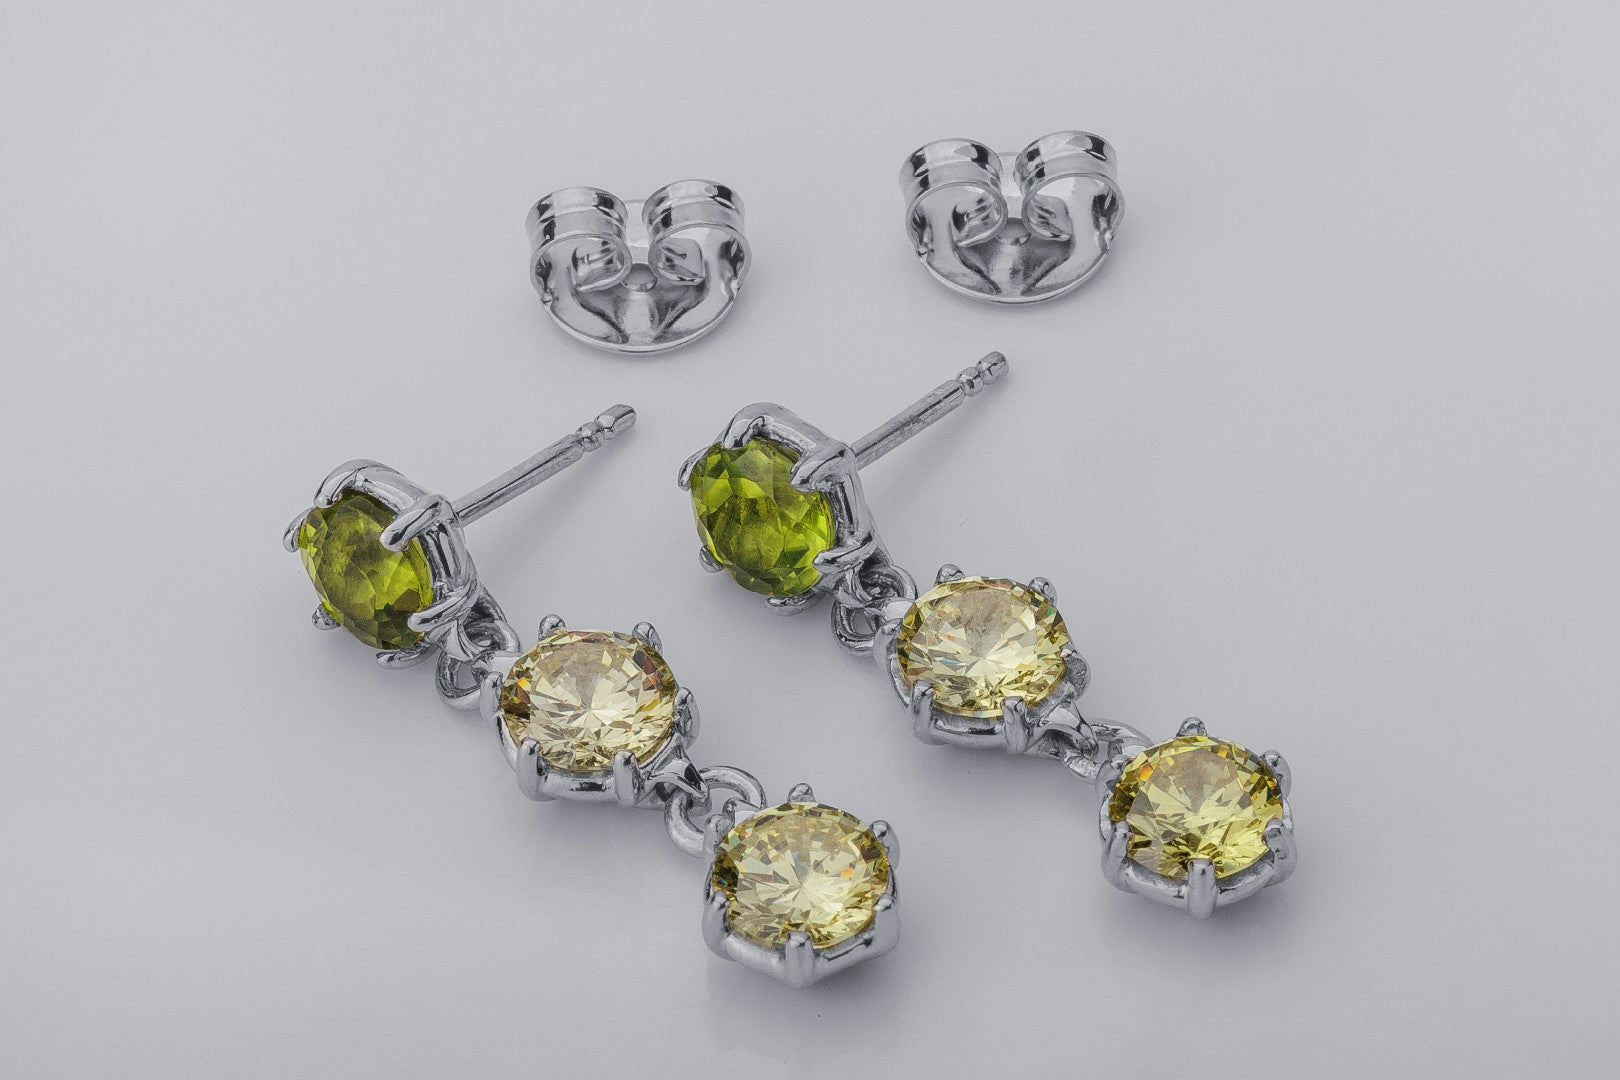 Bright Personality Earrings with Yellow and Shampagne Gems, Rhodium Plated 925 Silver - vikingworkshop